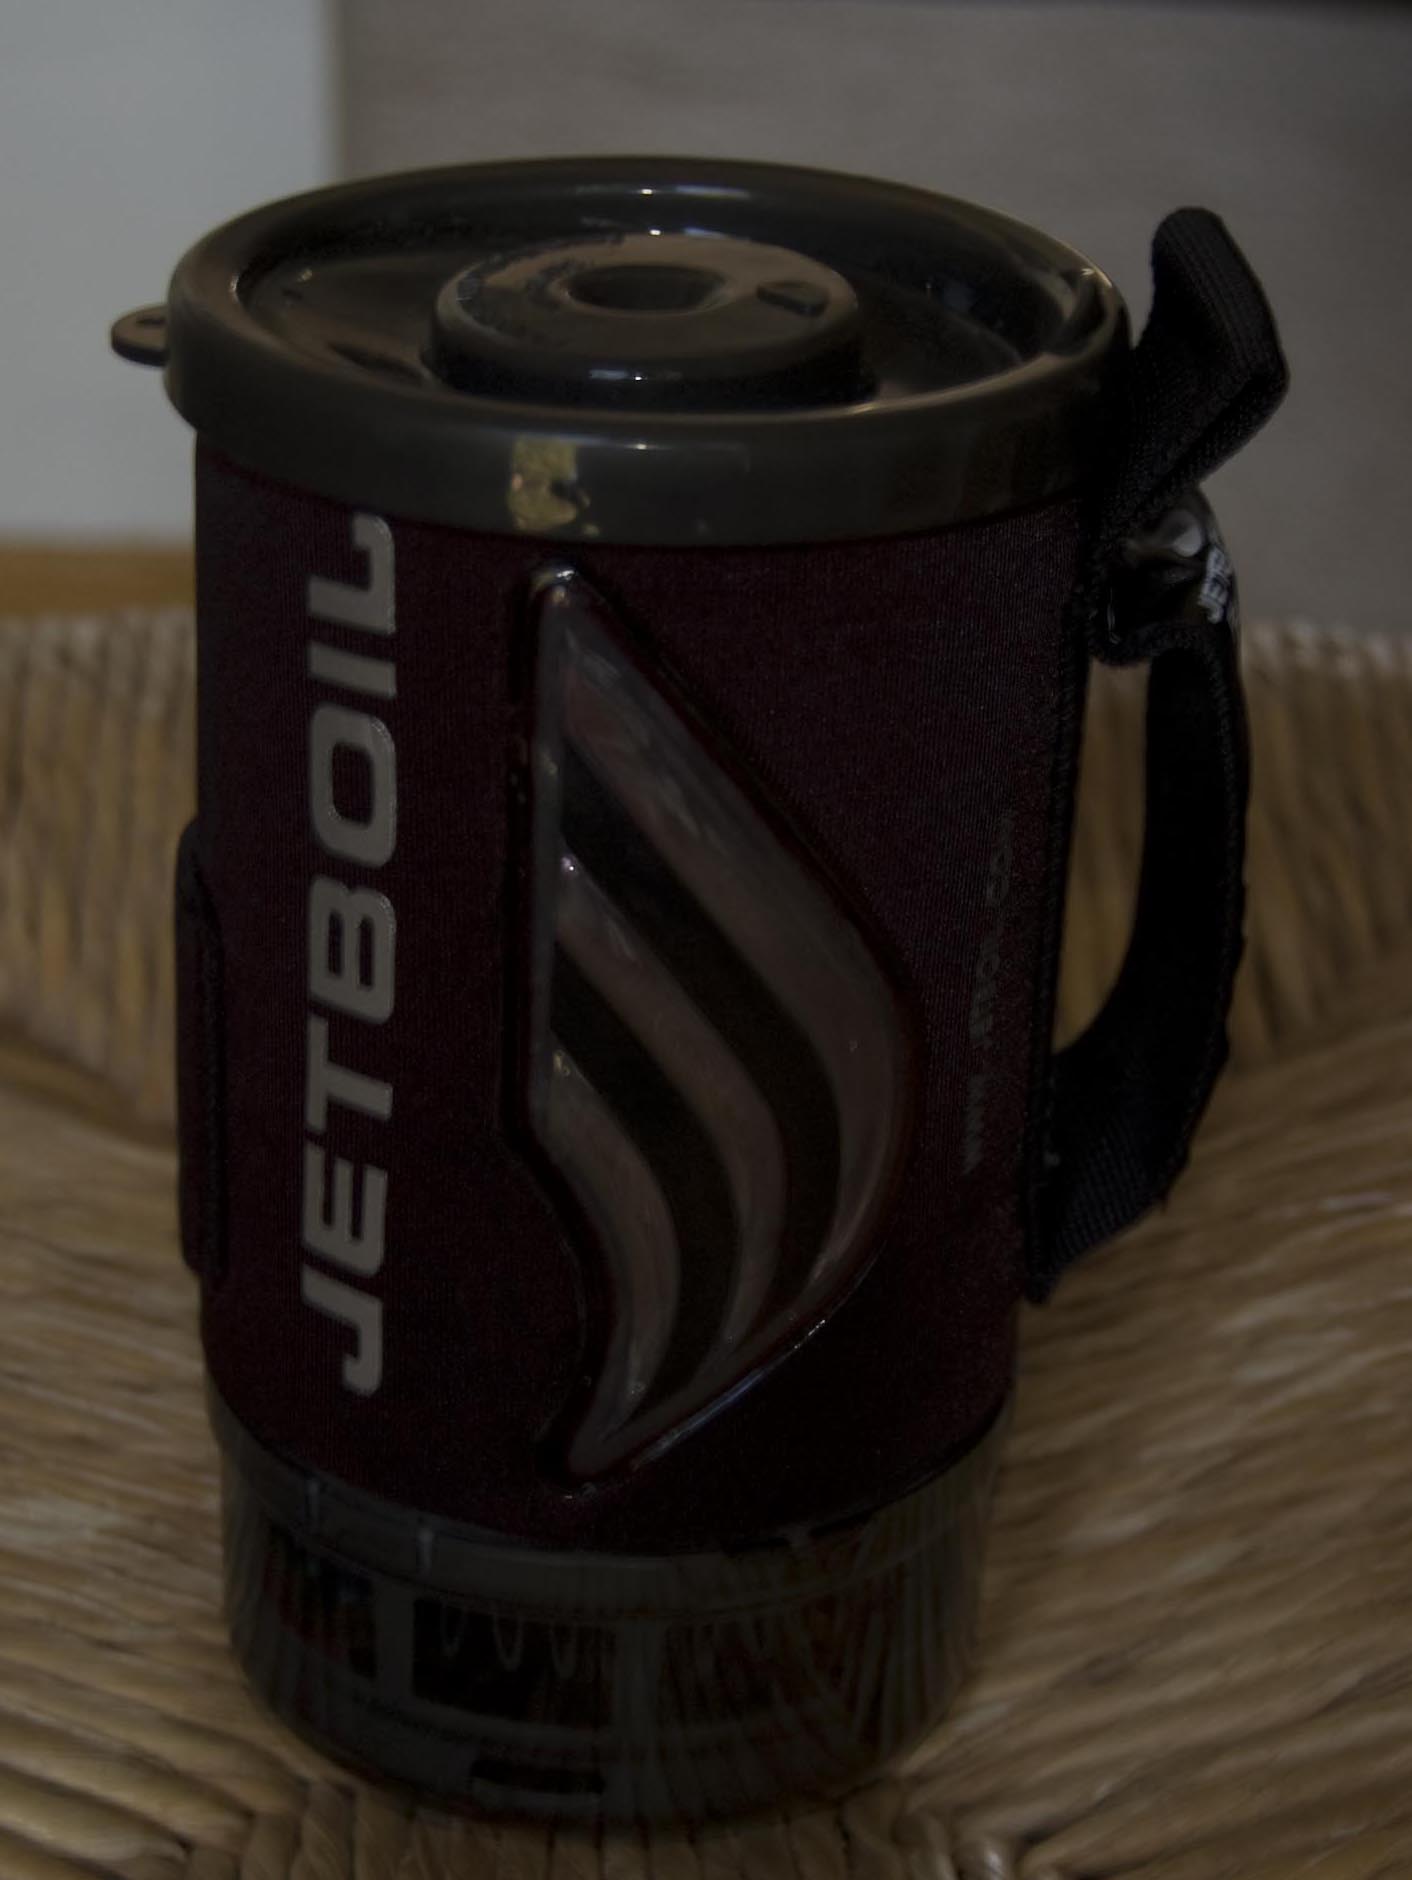 Jetboil flash packed up